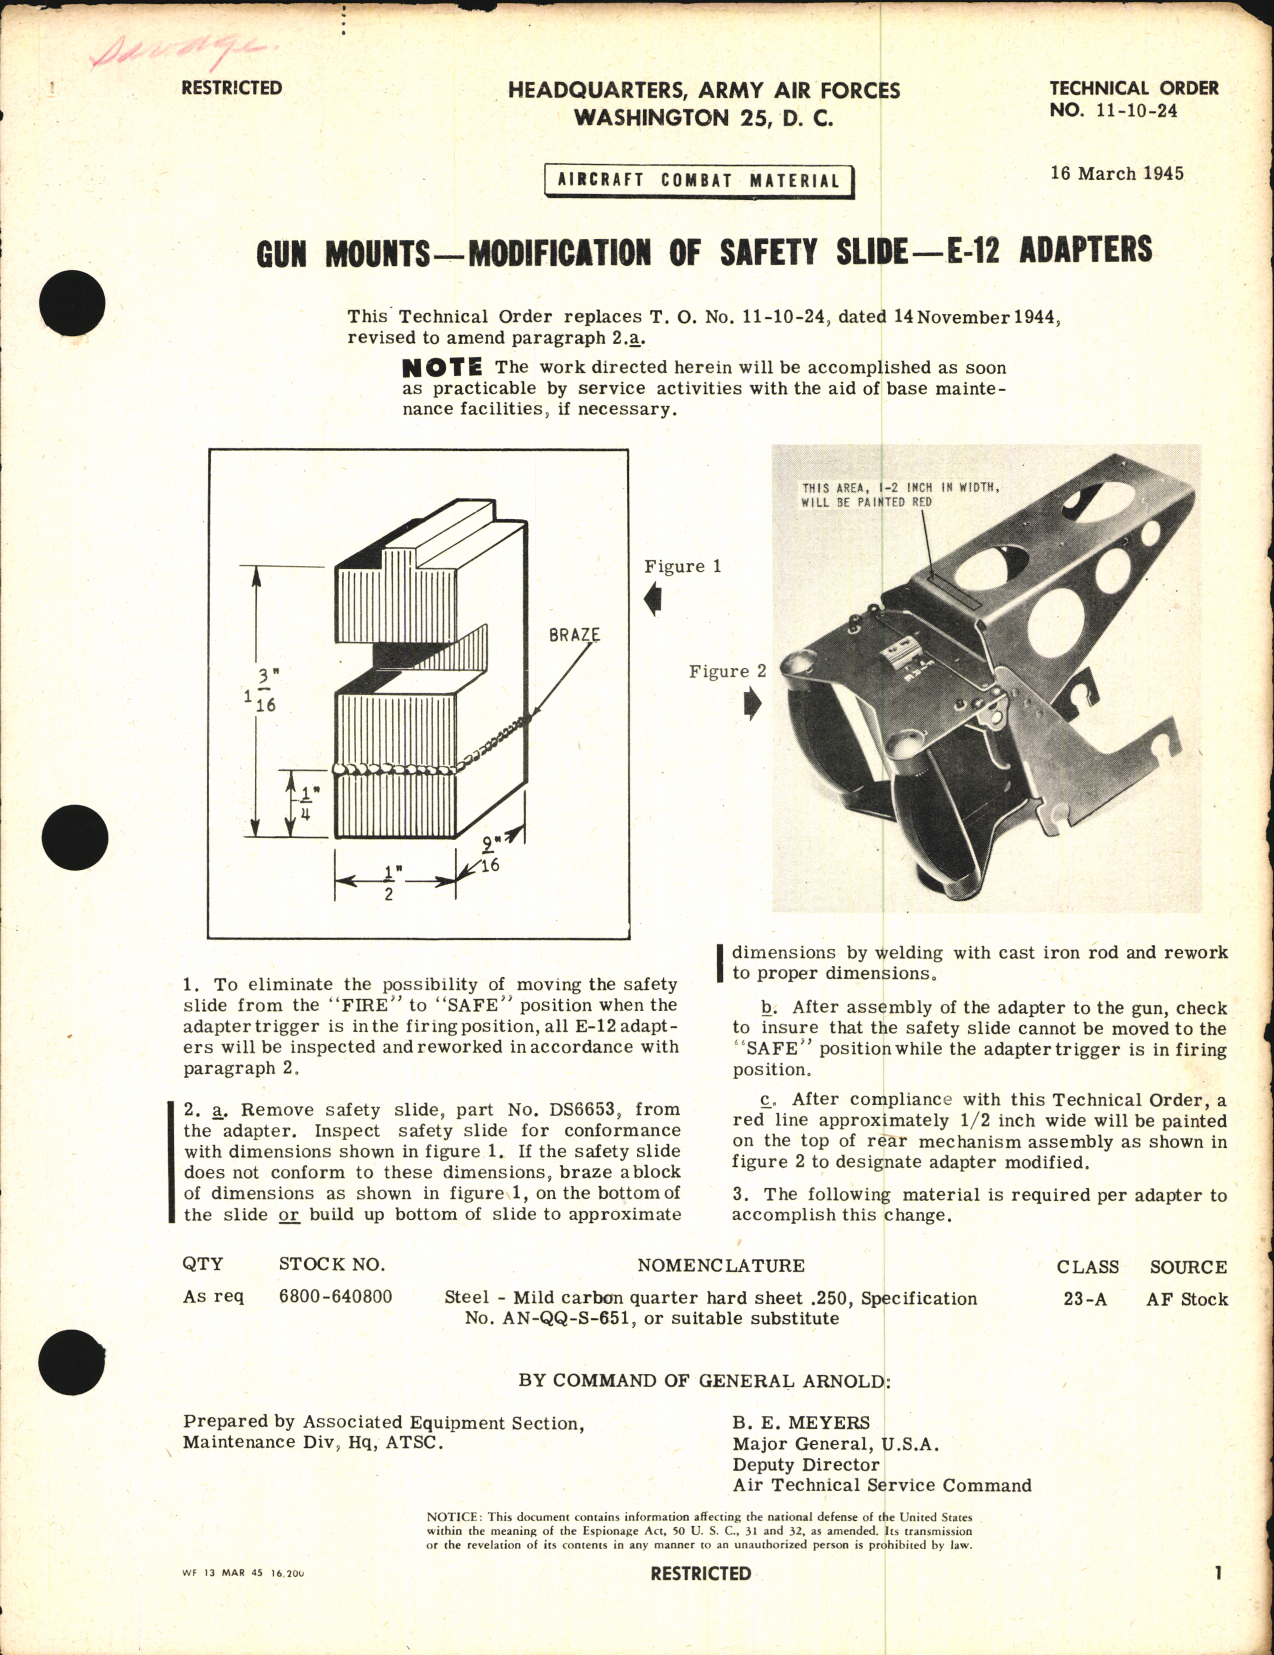 Sample page 1 from AirCorps Library document: Modification of Safety Slide for E-12 Gun Mount Adapters